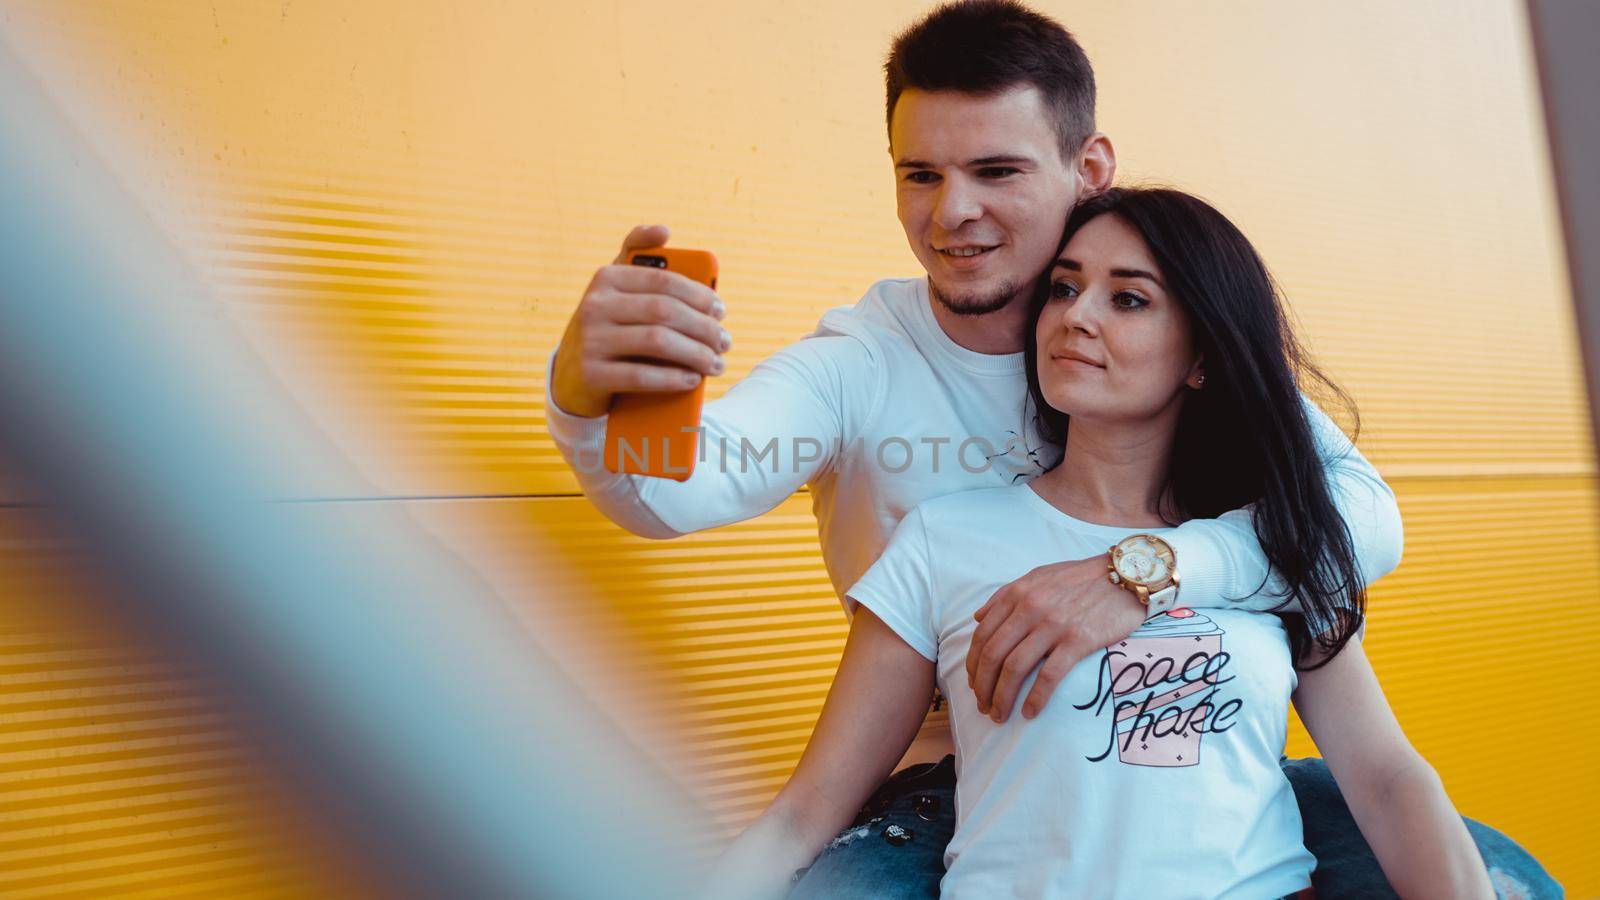 Young lovely couple posing together while making selfie on smartphone over yellow background